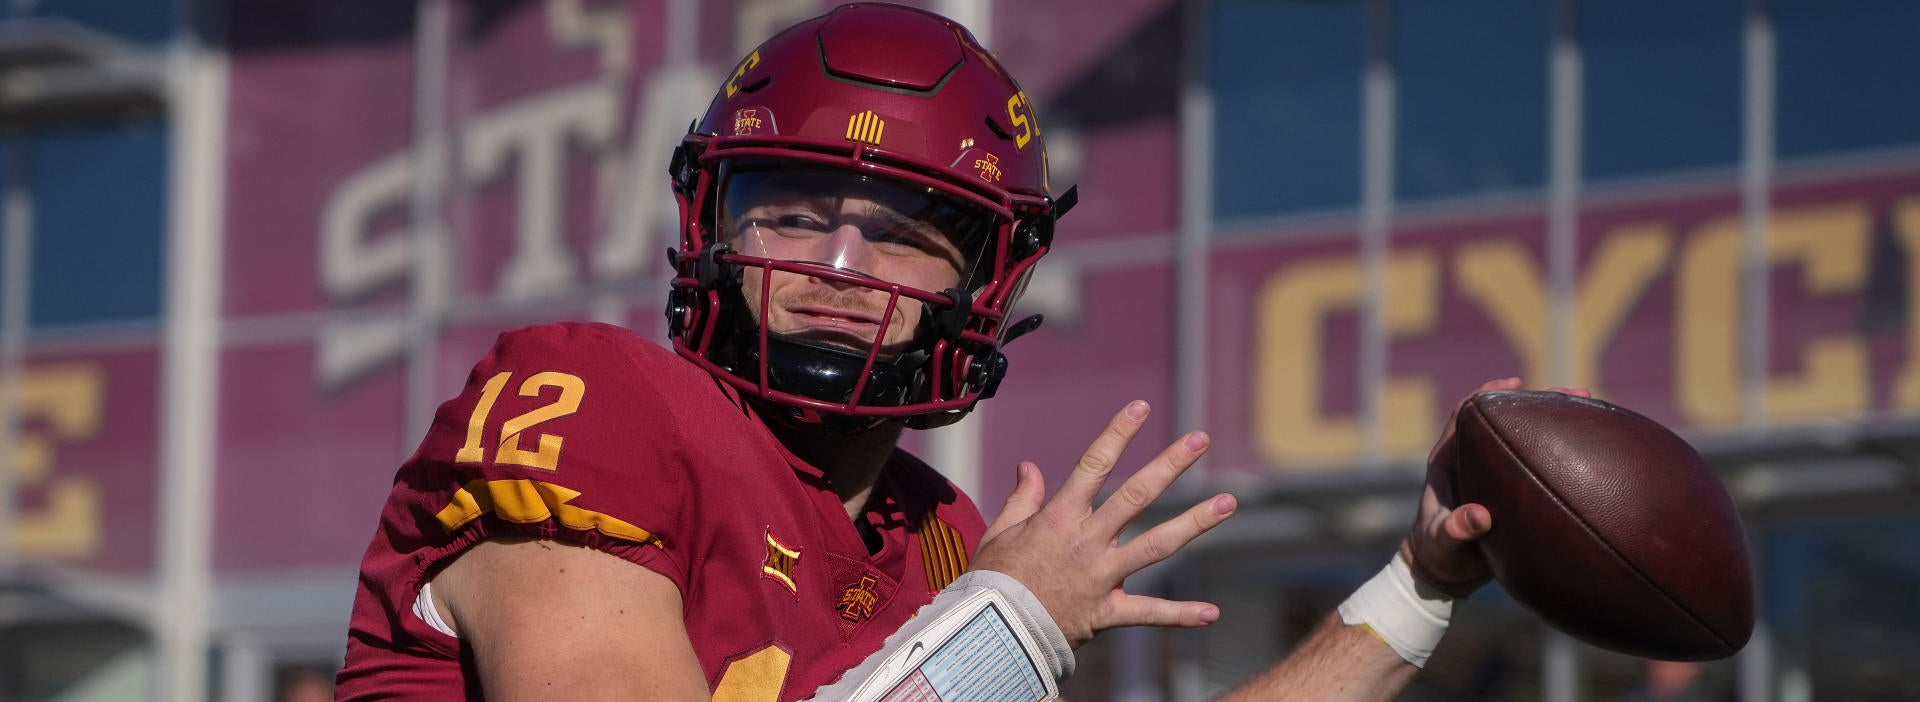 2023 Iowa State Cyclones win total betting strategy: Return of offensive firepower needed for Matt Campbell's team